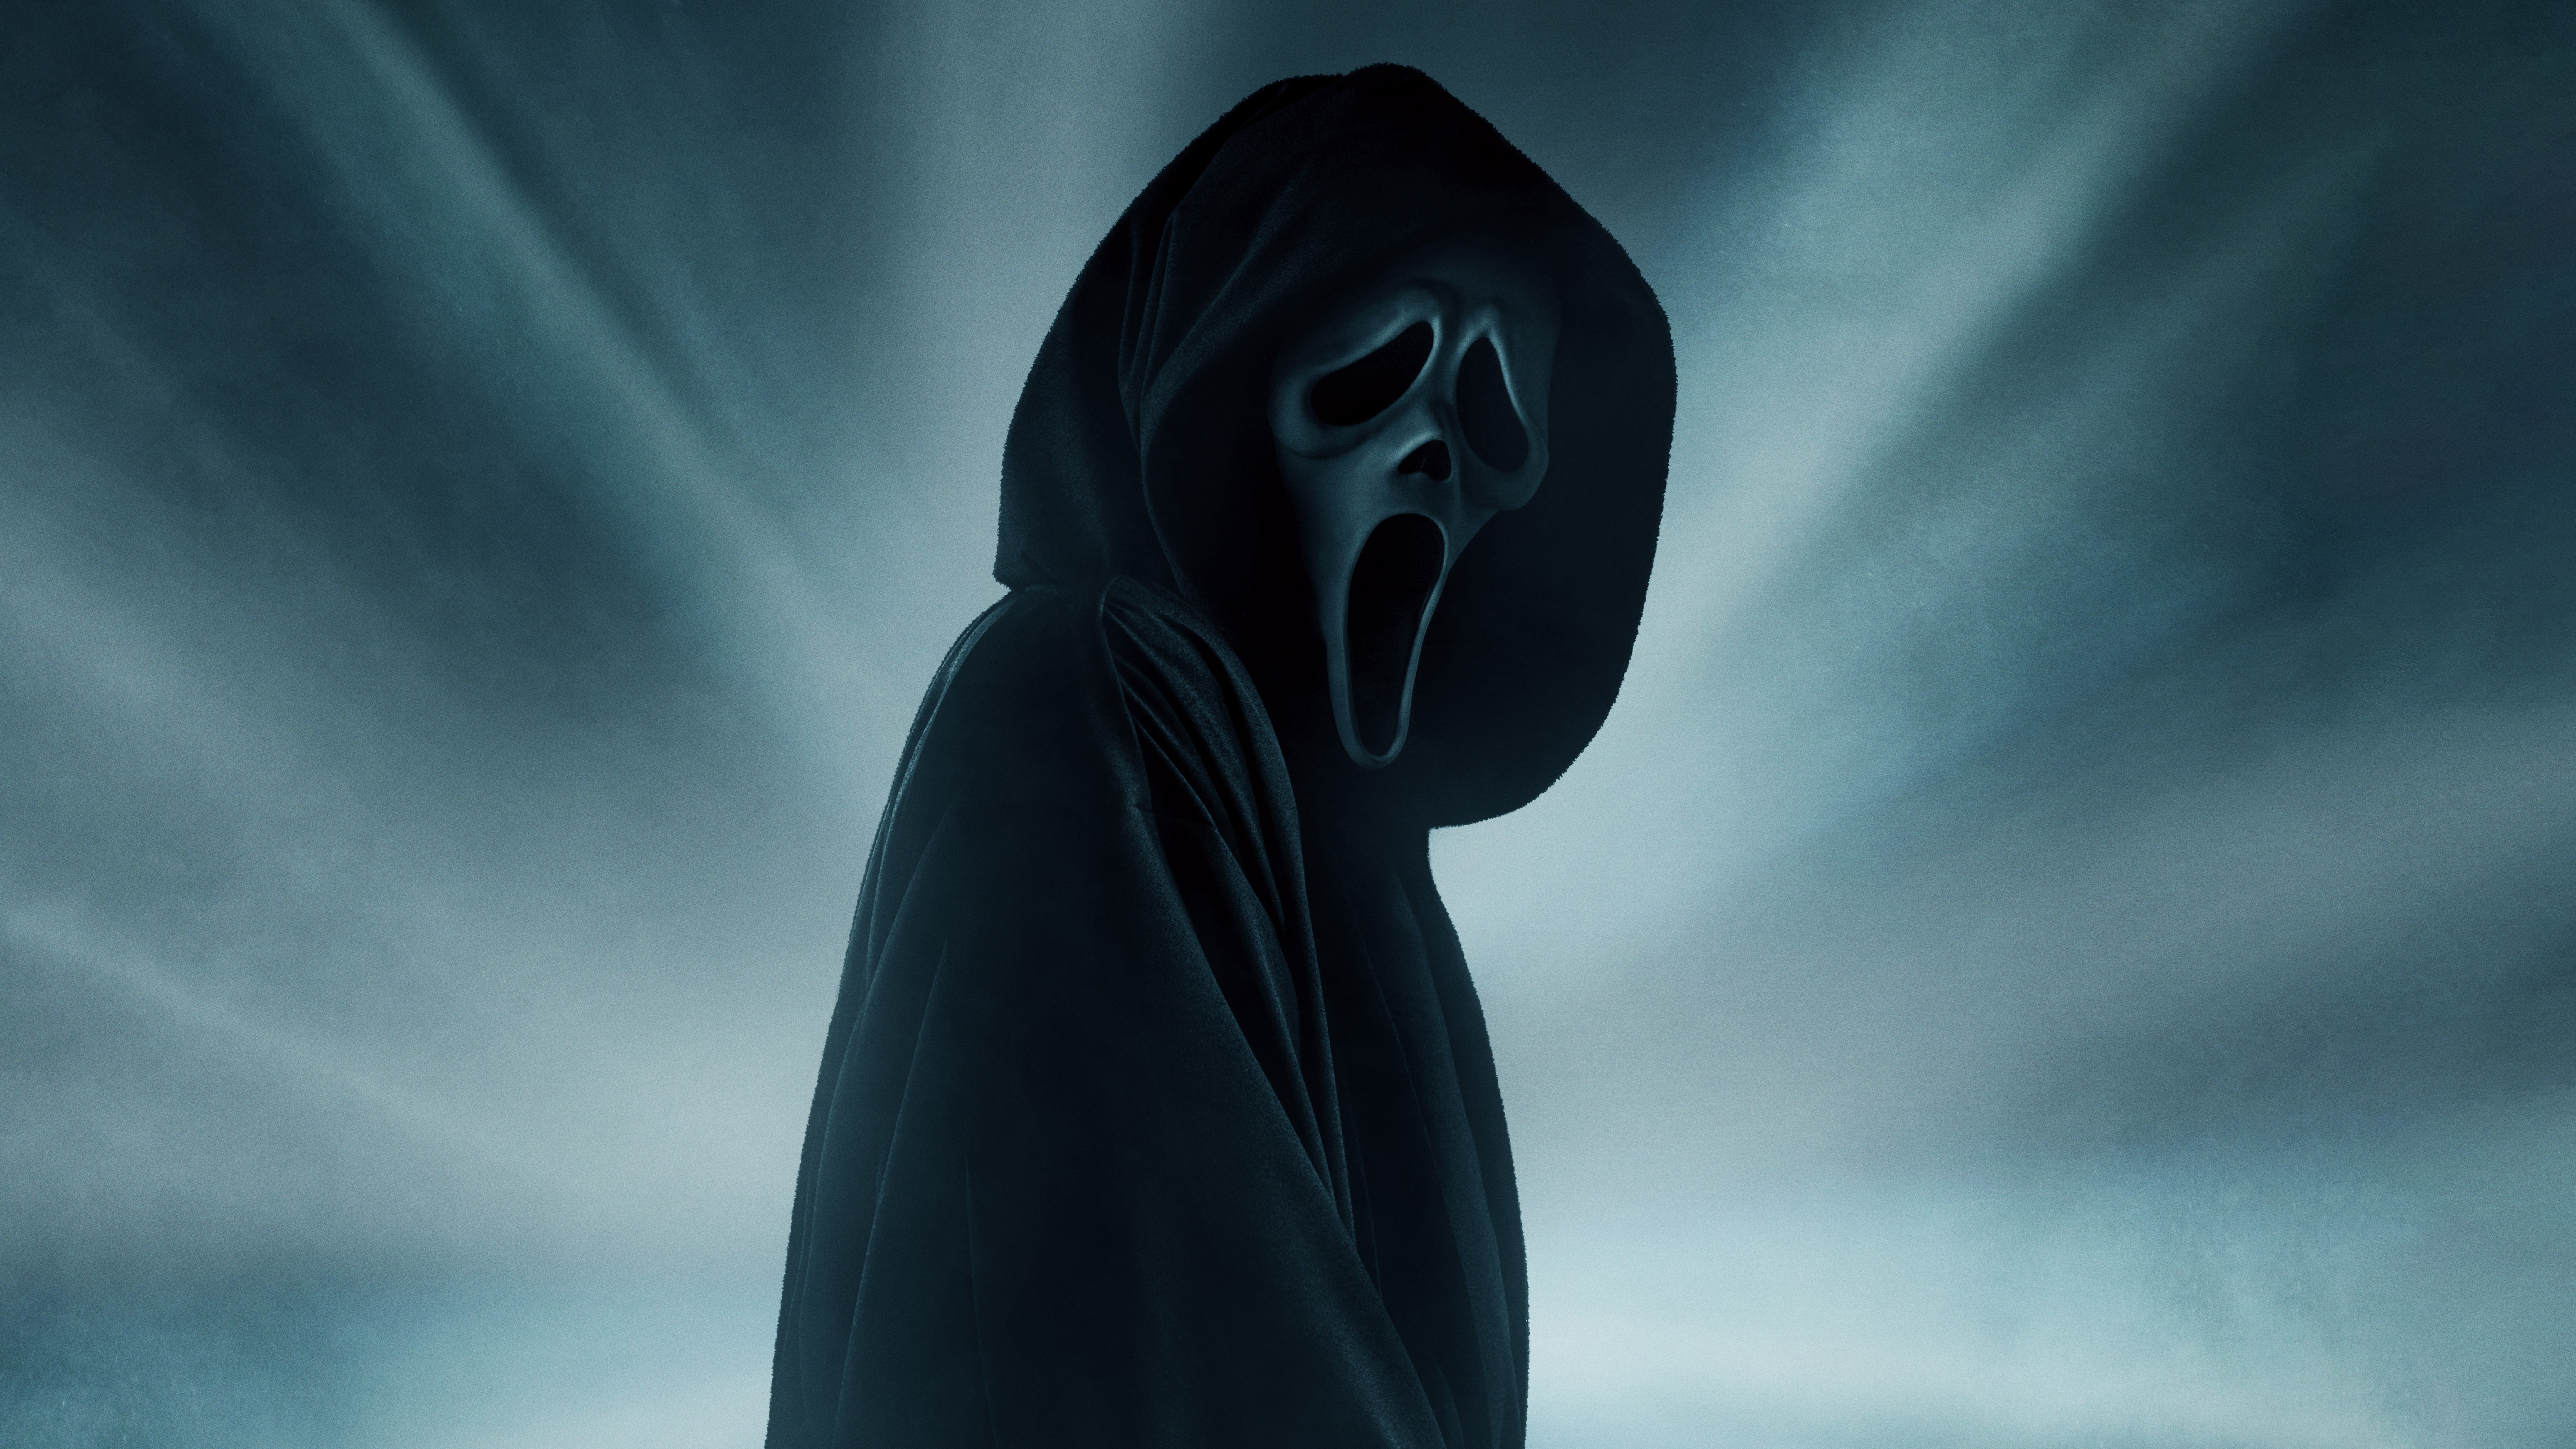 Scream (2022) HD Wallpaper and Background